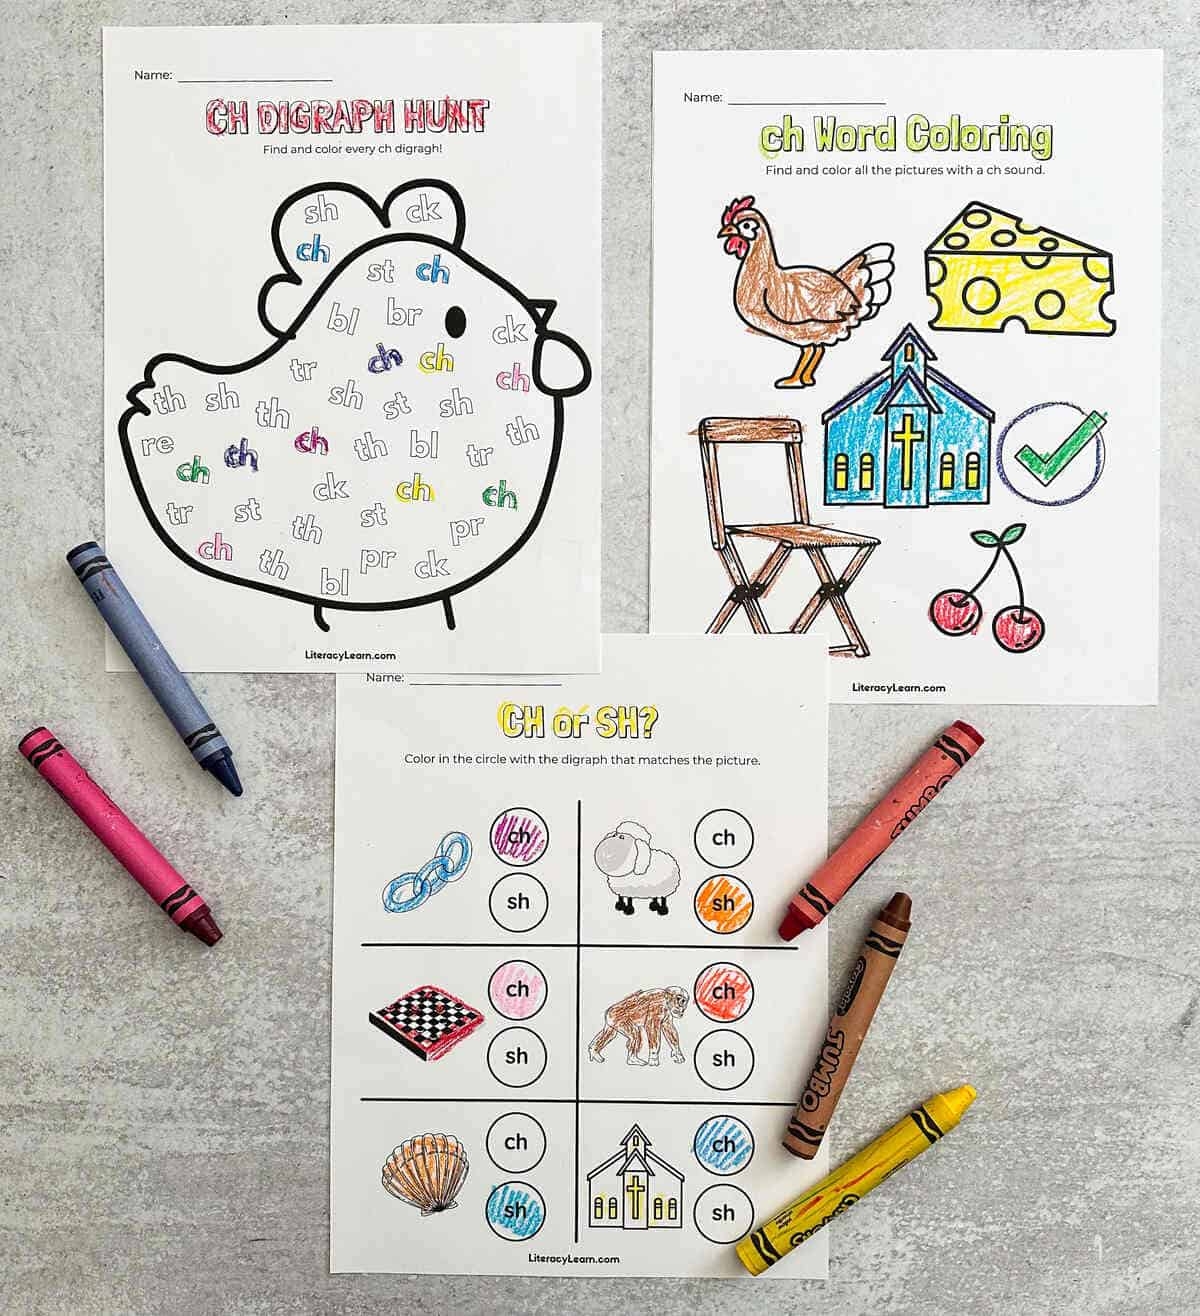 7 CH Worksheets For Digraph Learning Literacy Learn - Free Printable Ch Digraph Worksheets